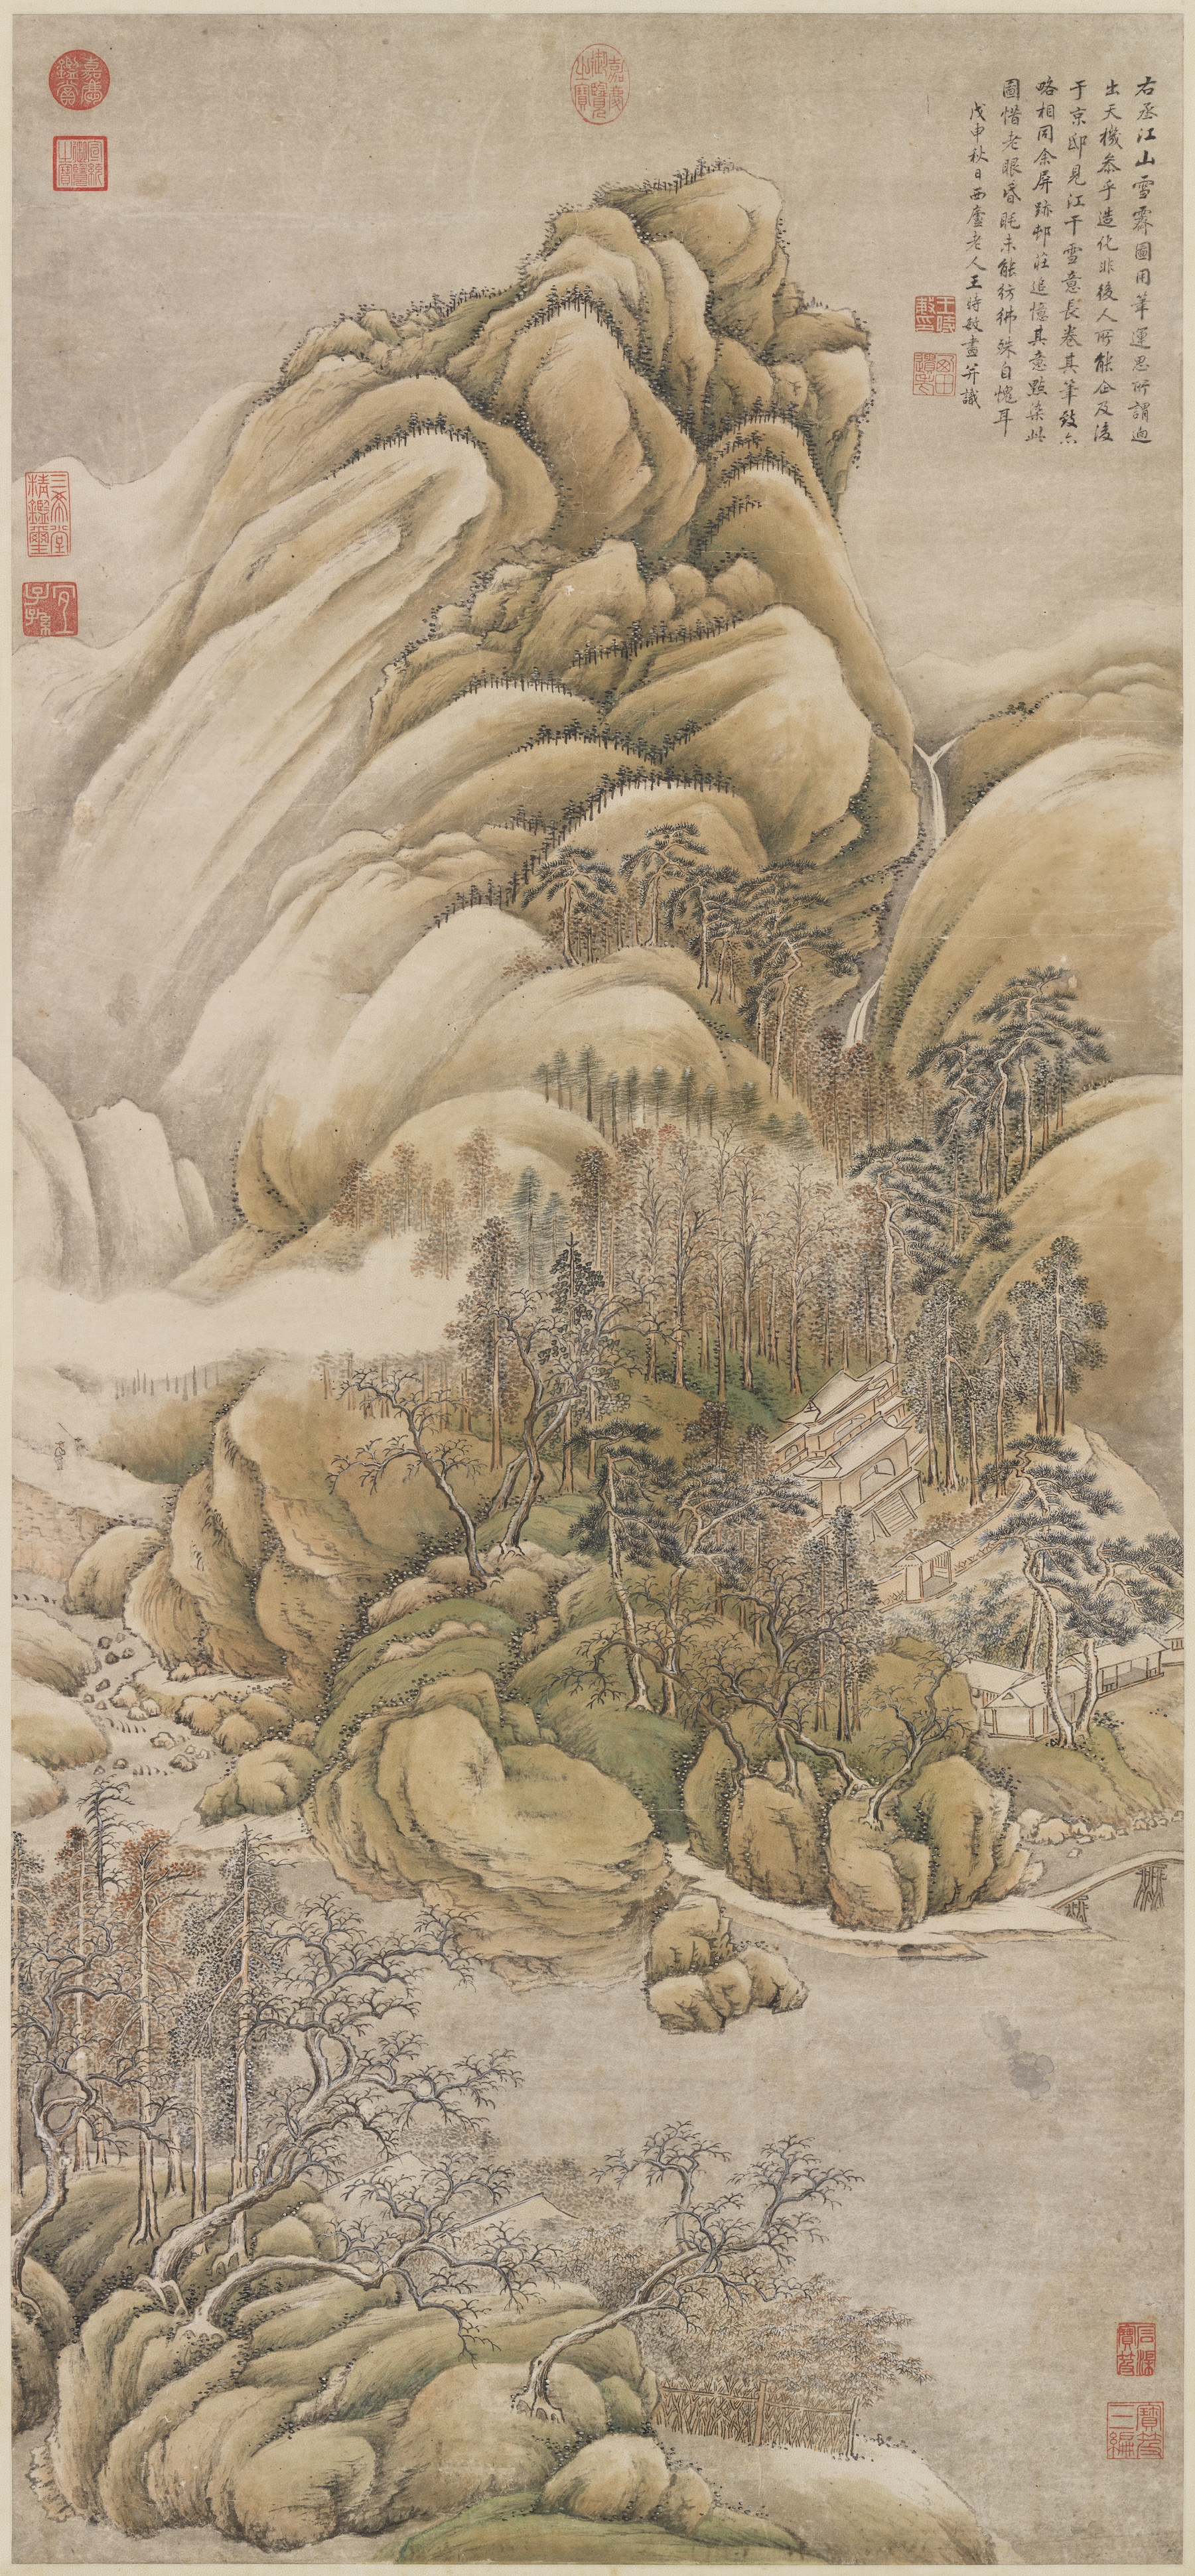 After Wang Wei's "Snow Over Rivers and Mountains"